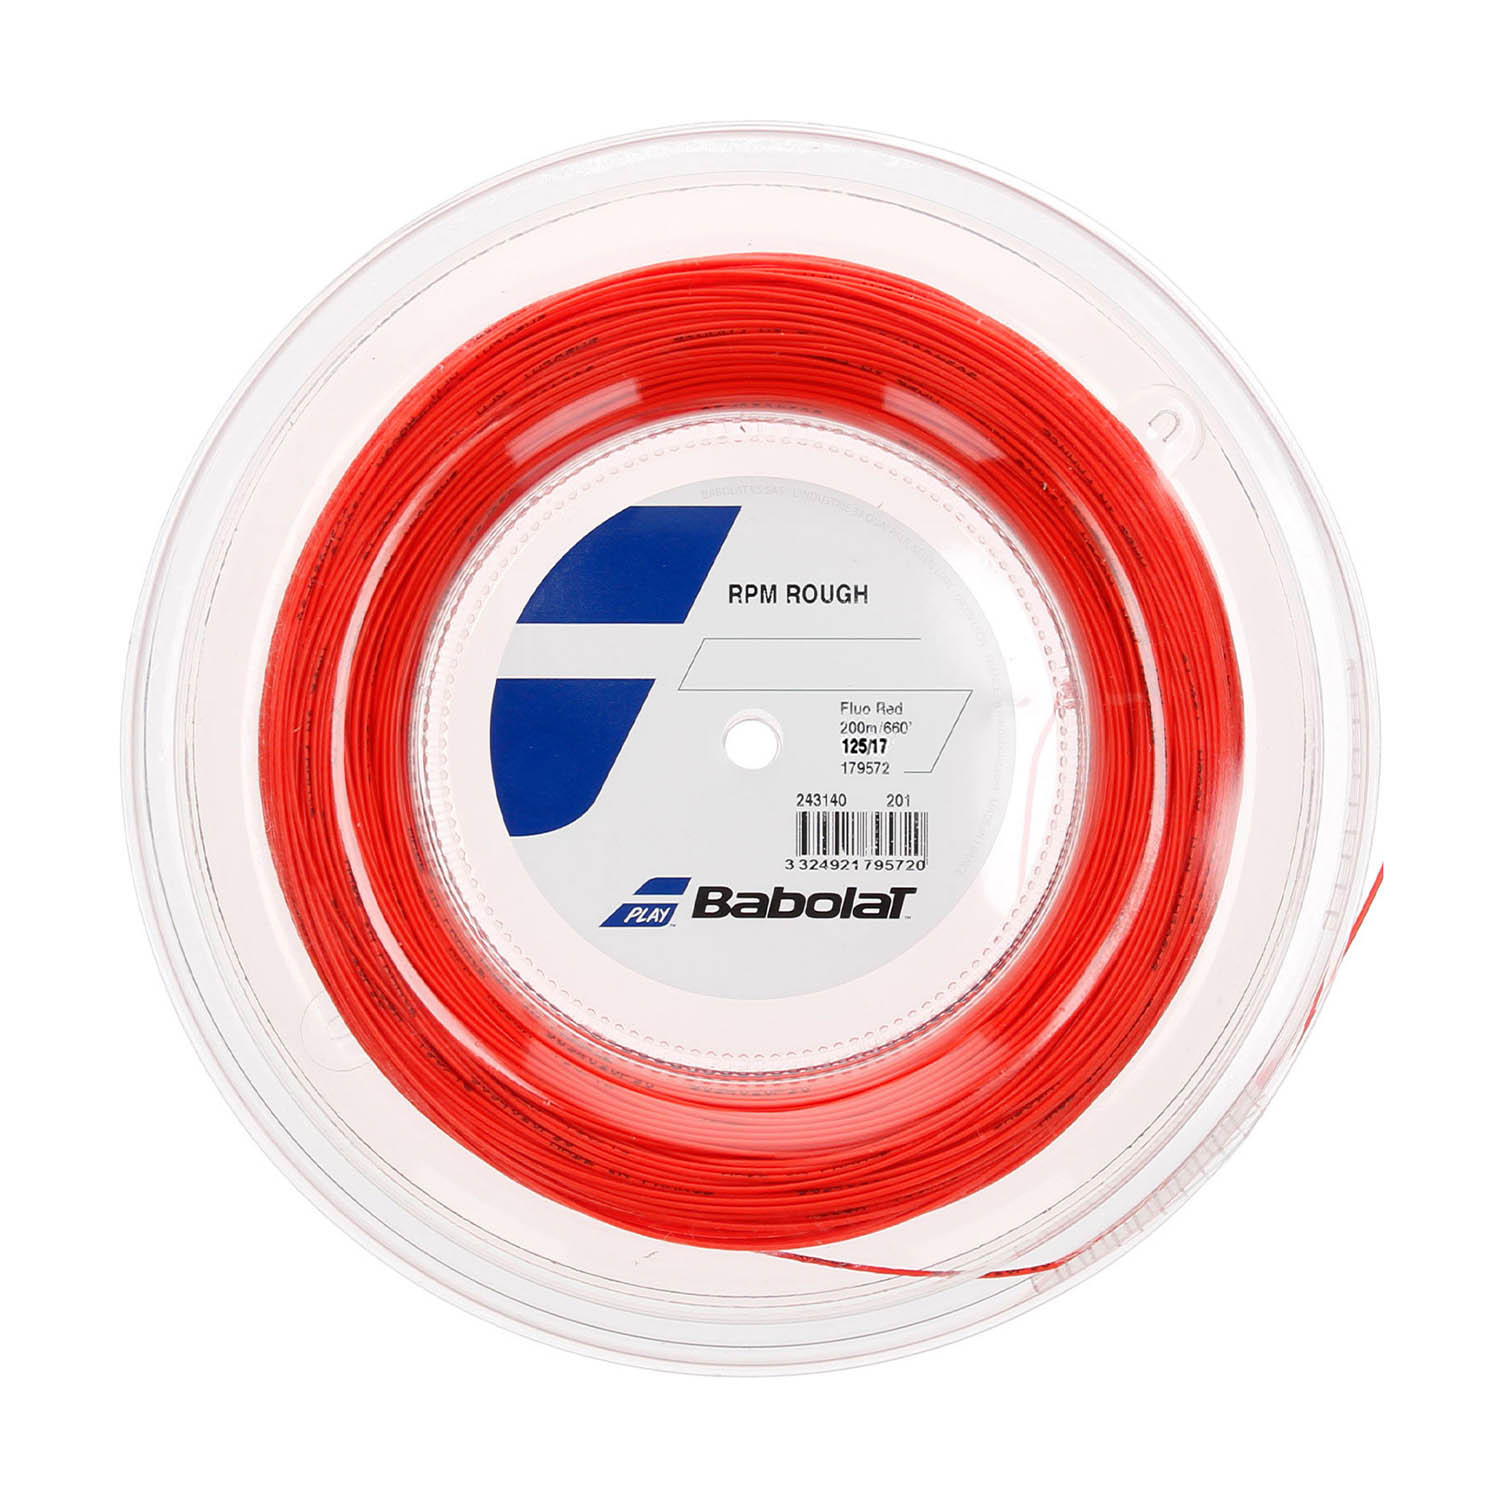 Babolat RPM Rough 1.25 200 m String Reel - Red Fluo